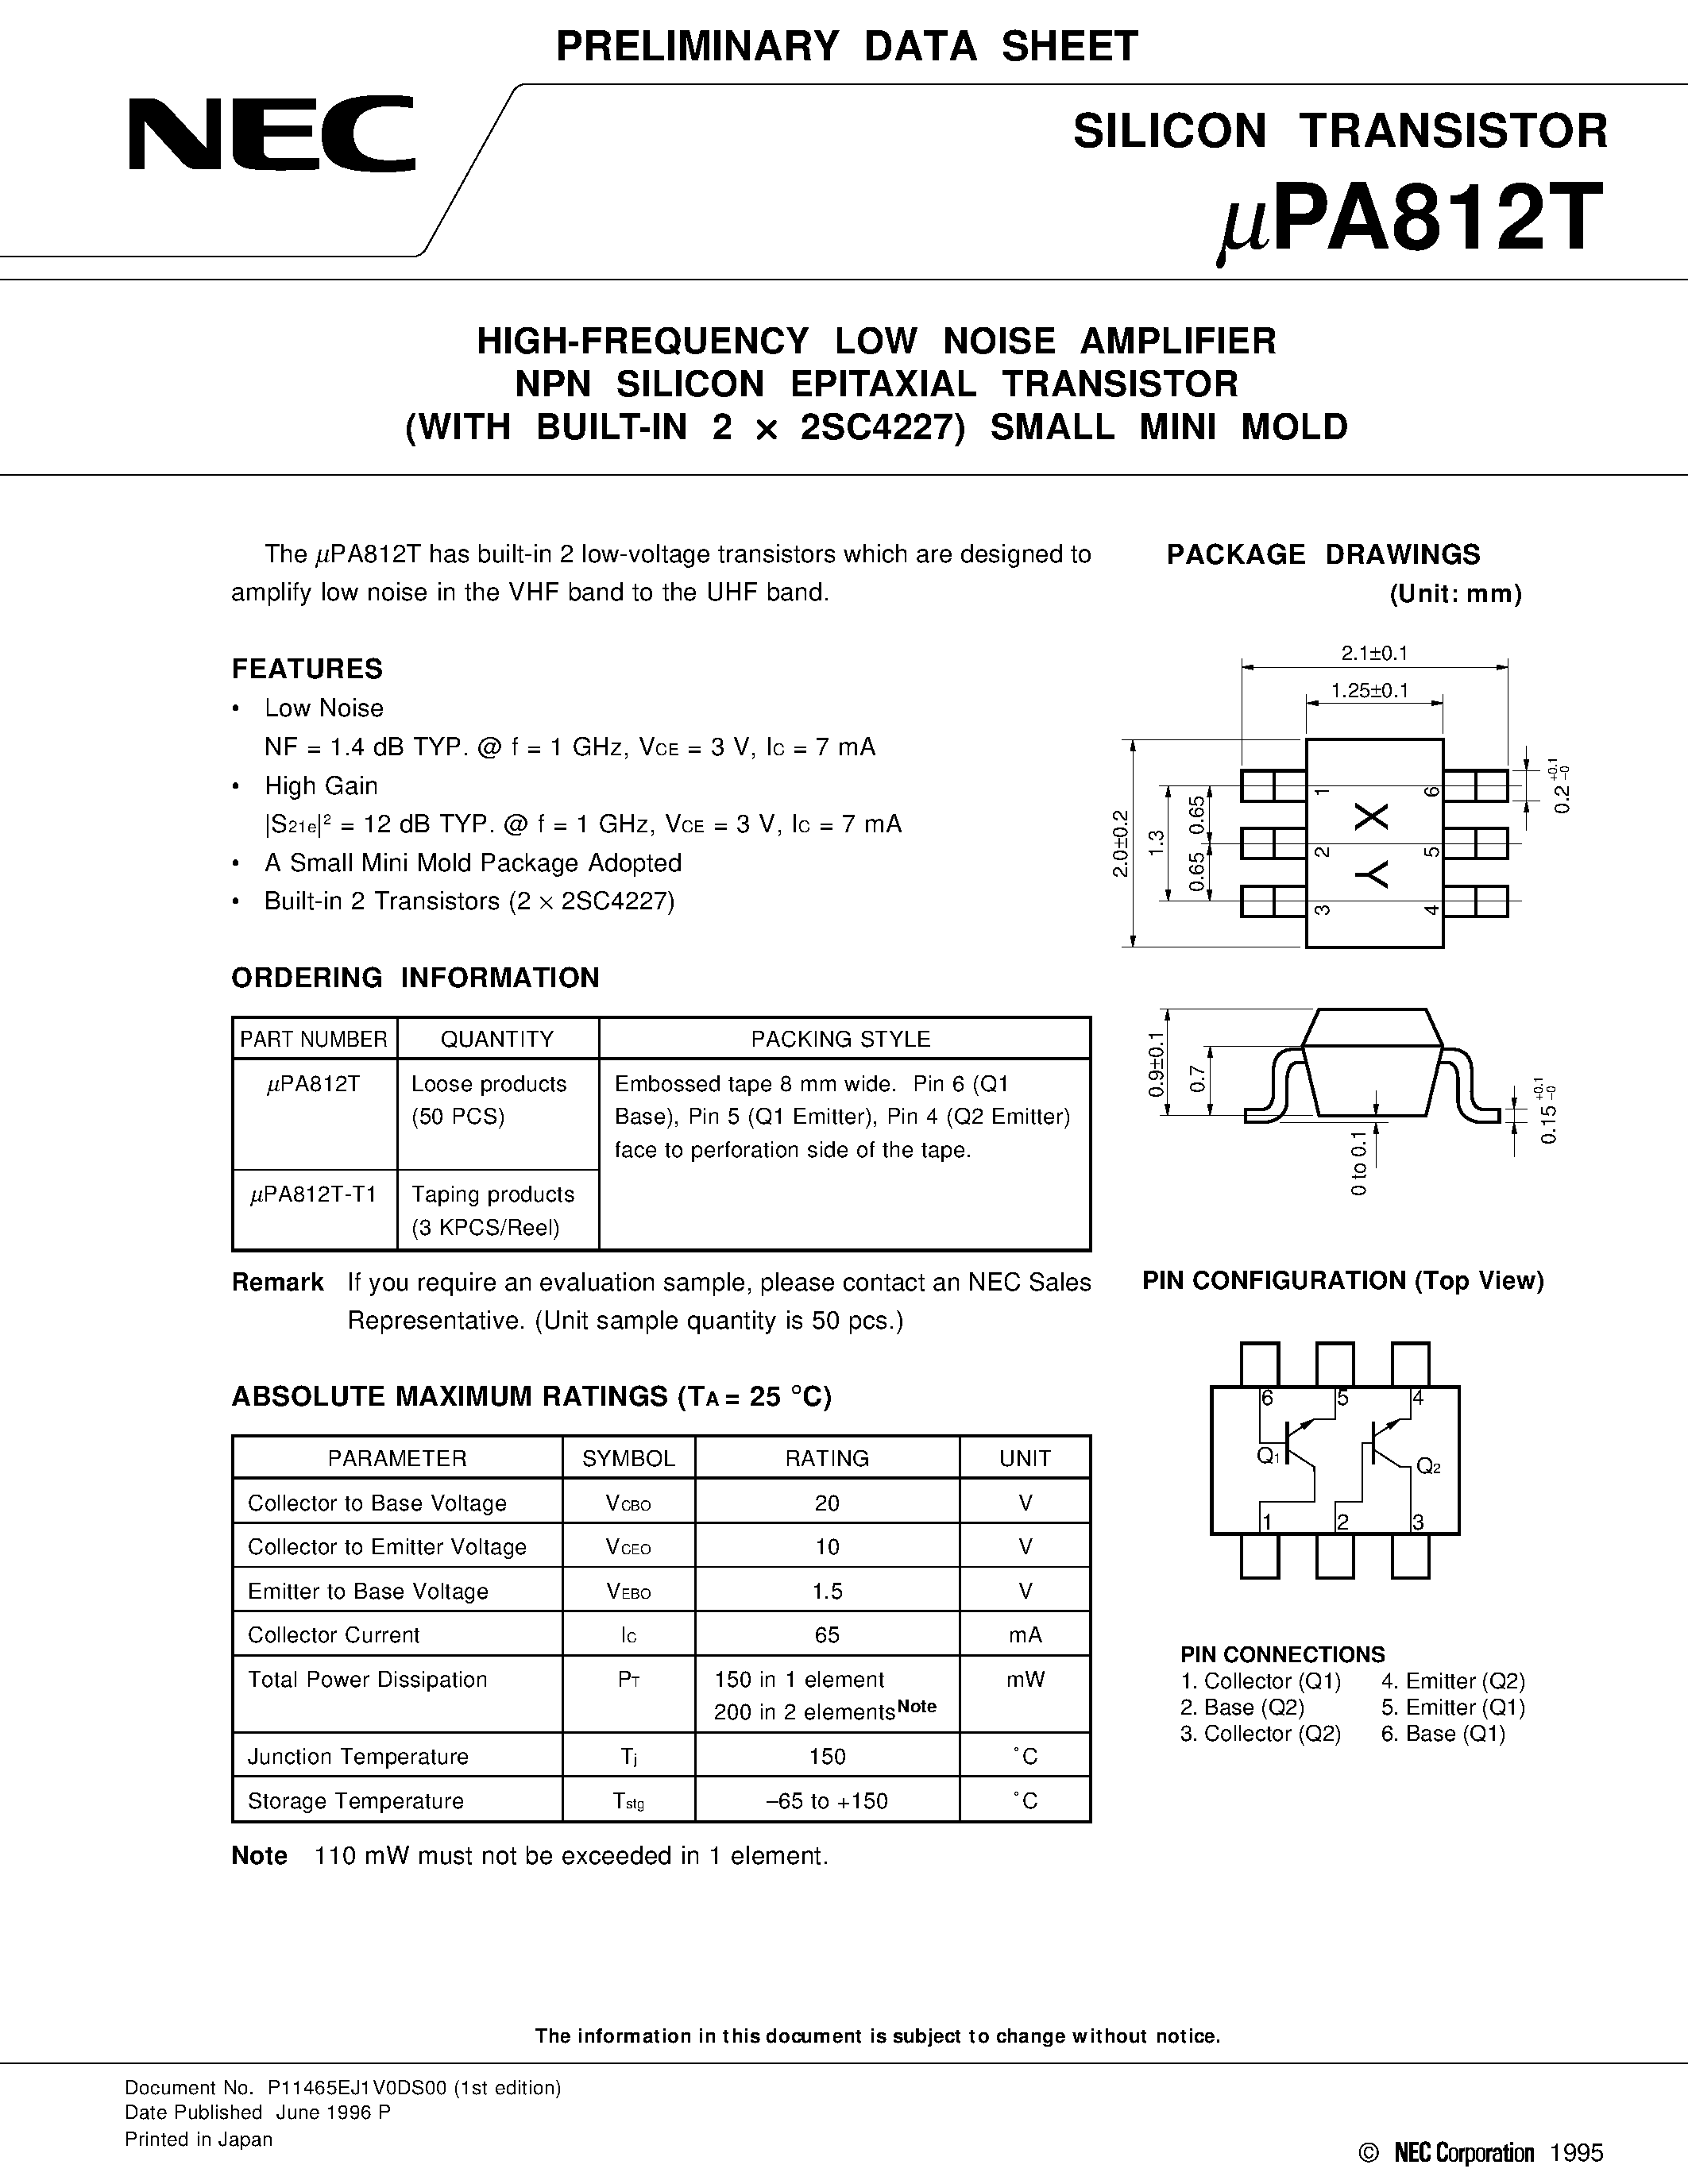 Datasheet UPA812 - HIGH-FREQUENCY LOW NOISE AMPLIFIER NPN SILICON EPITAXIAL TRANSISTOR WITH BUILT-IN 2 x 2SC4227 SMALL MINI MOLD page 1